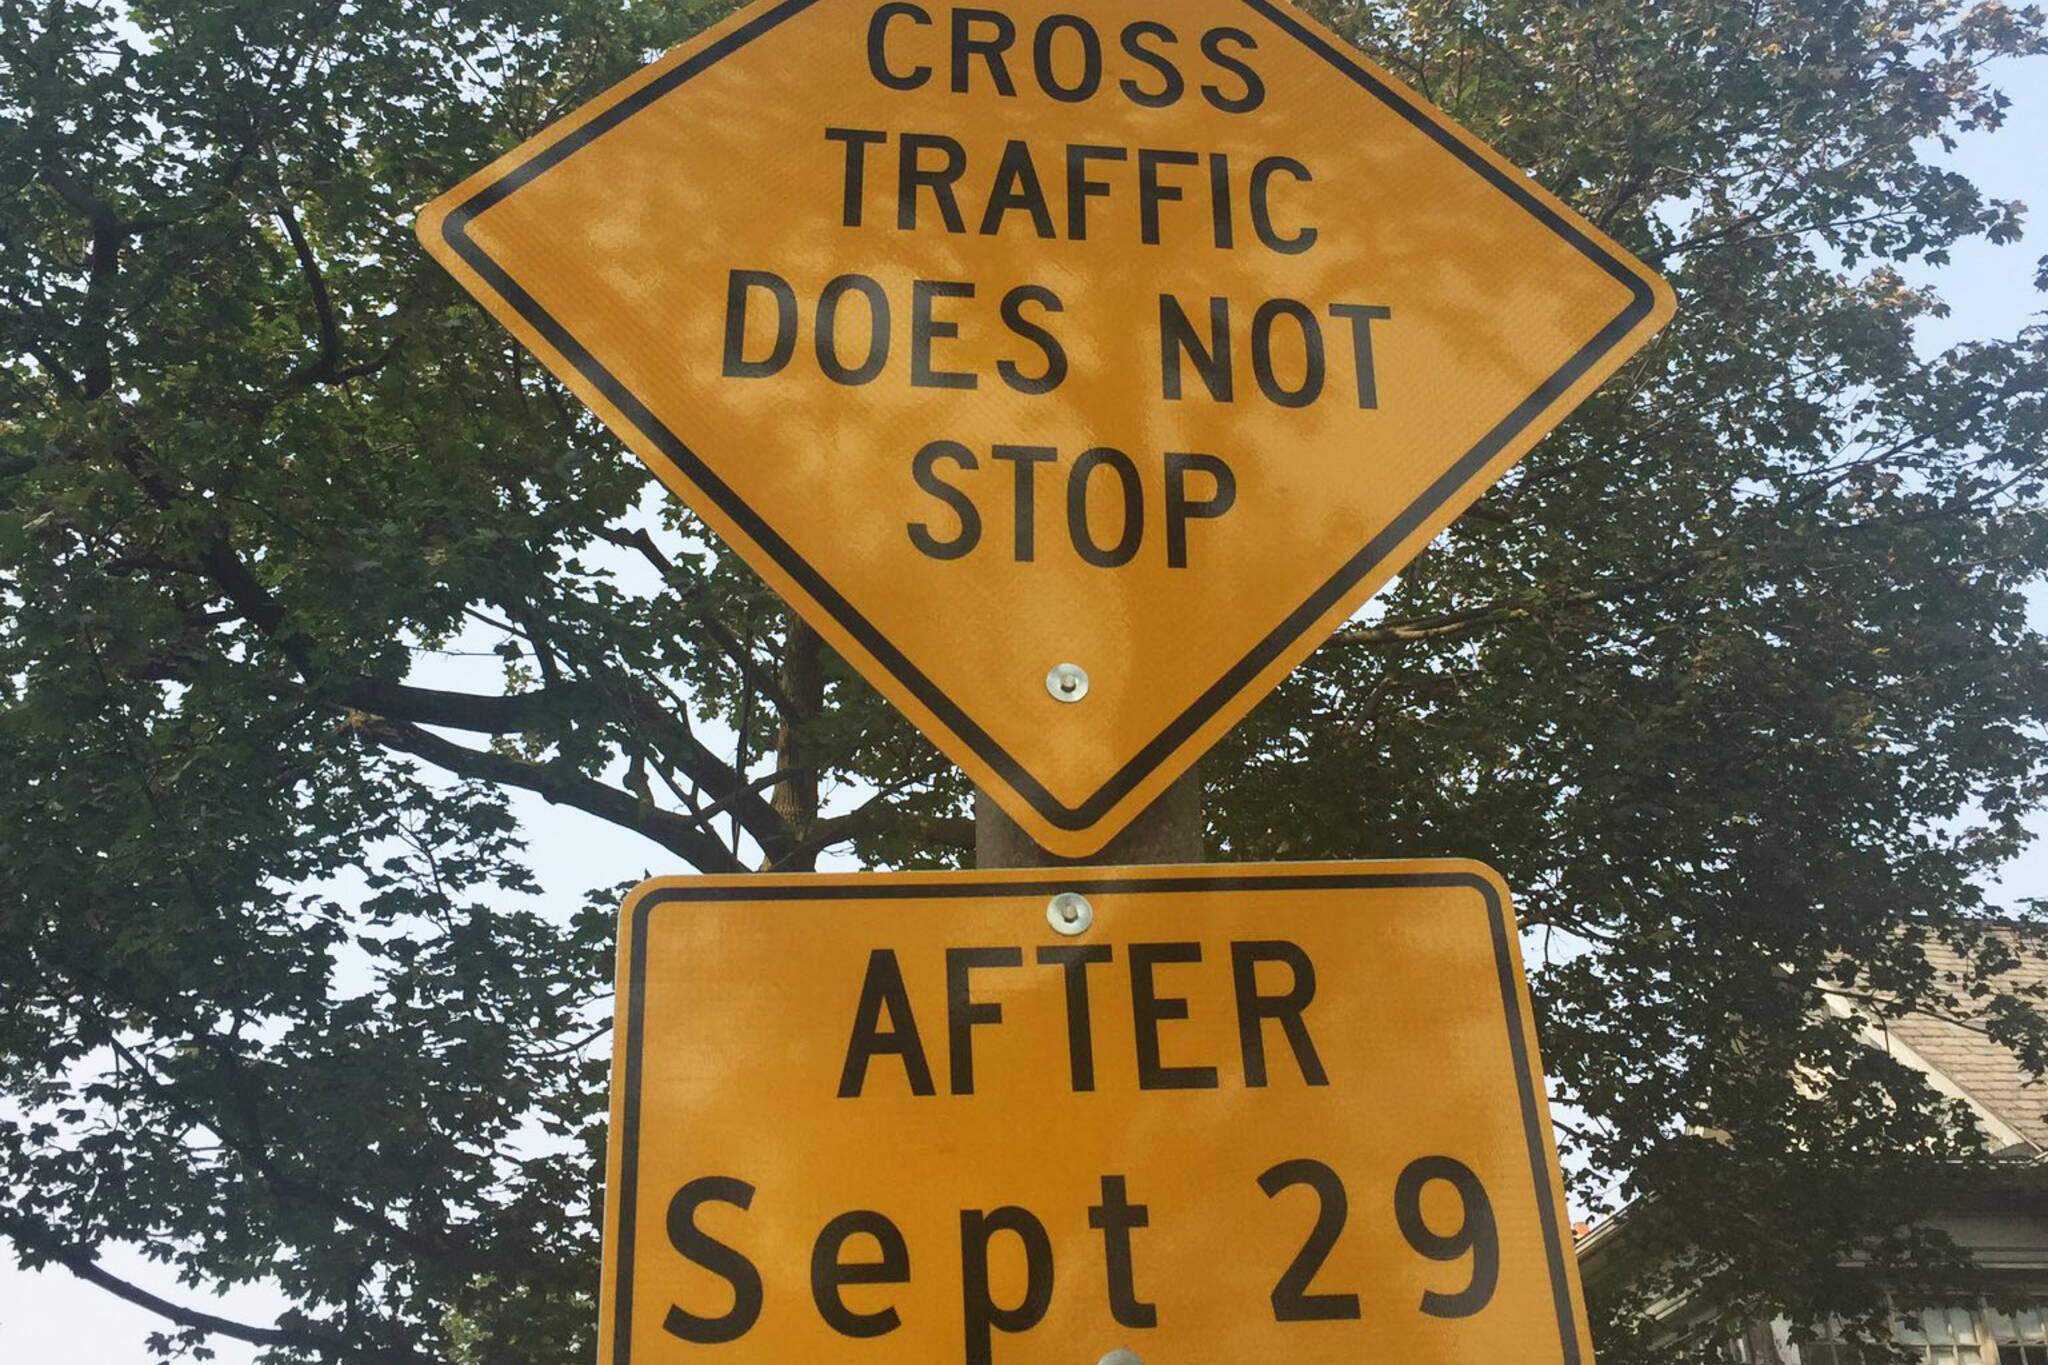 rosedale stop sign controversy